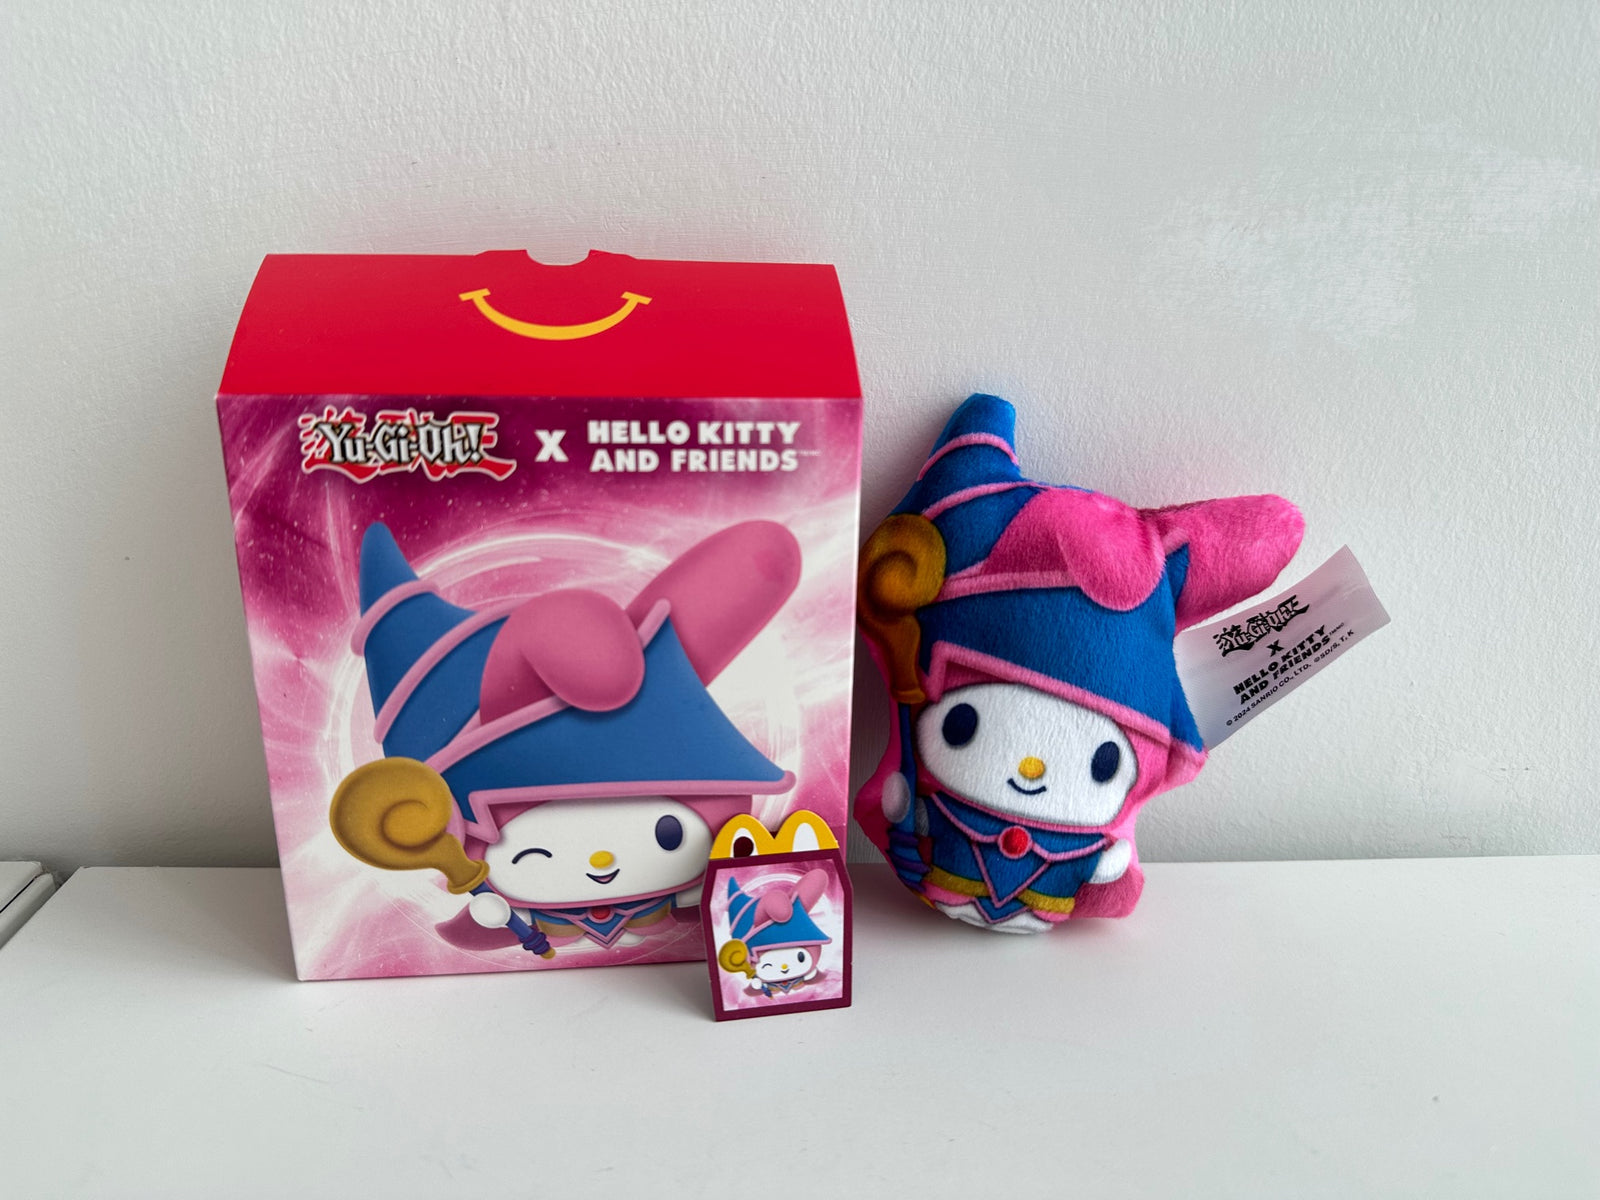 Melody - YU-GI-OH! X HELLO KITTY AND FRIENDS by McDonald's  - 1